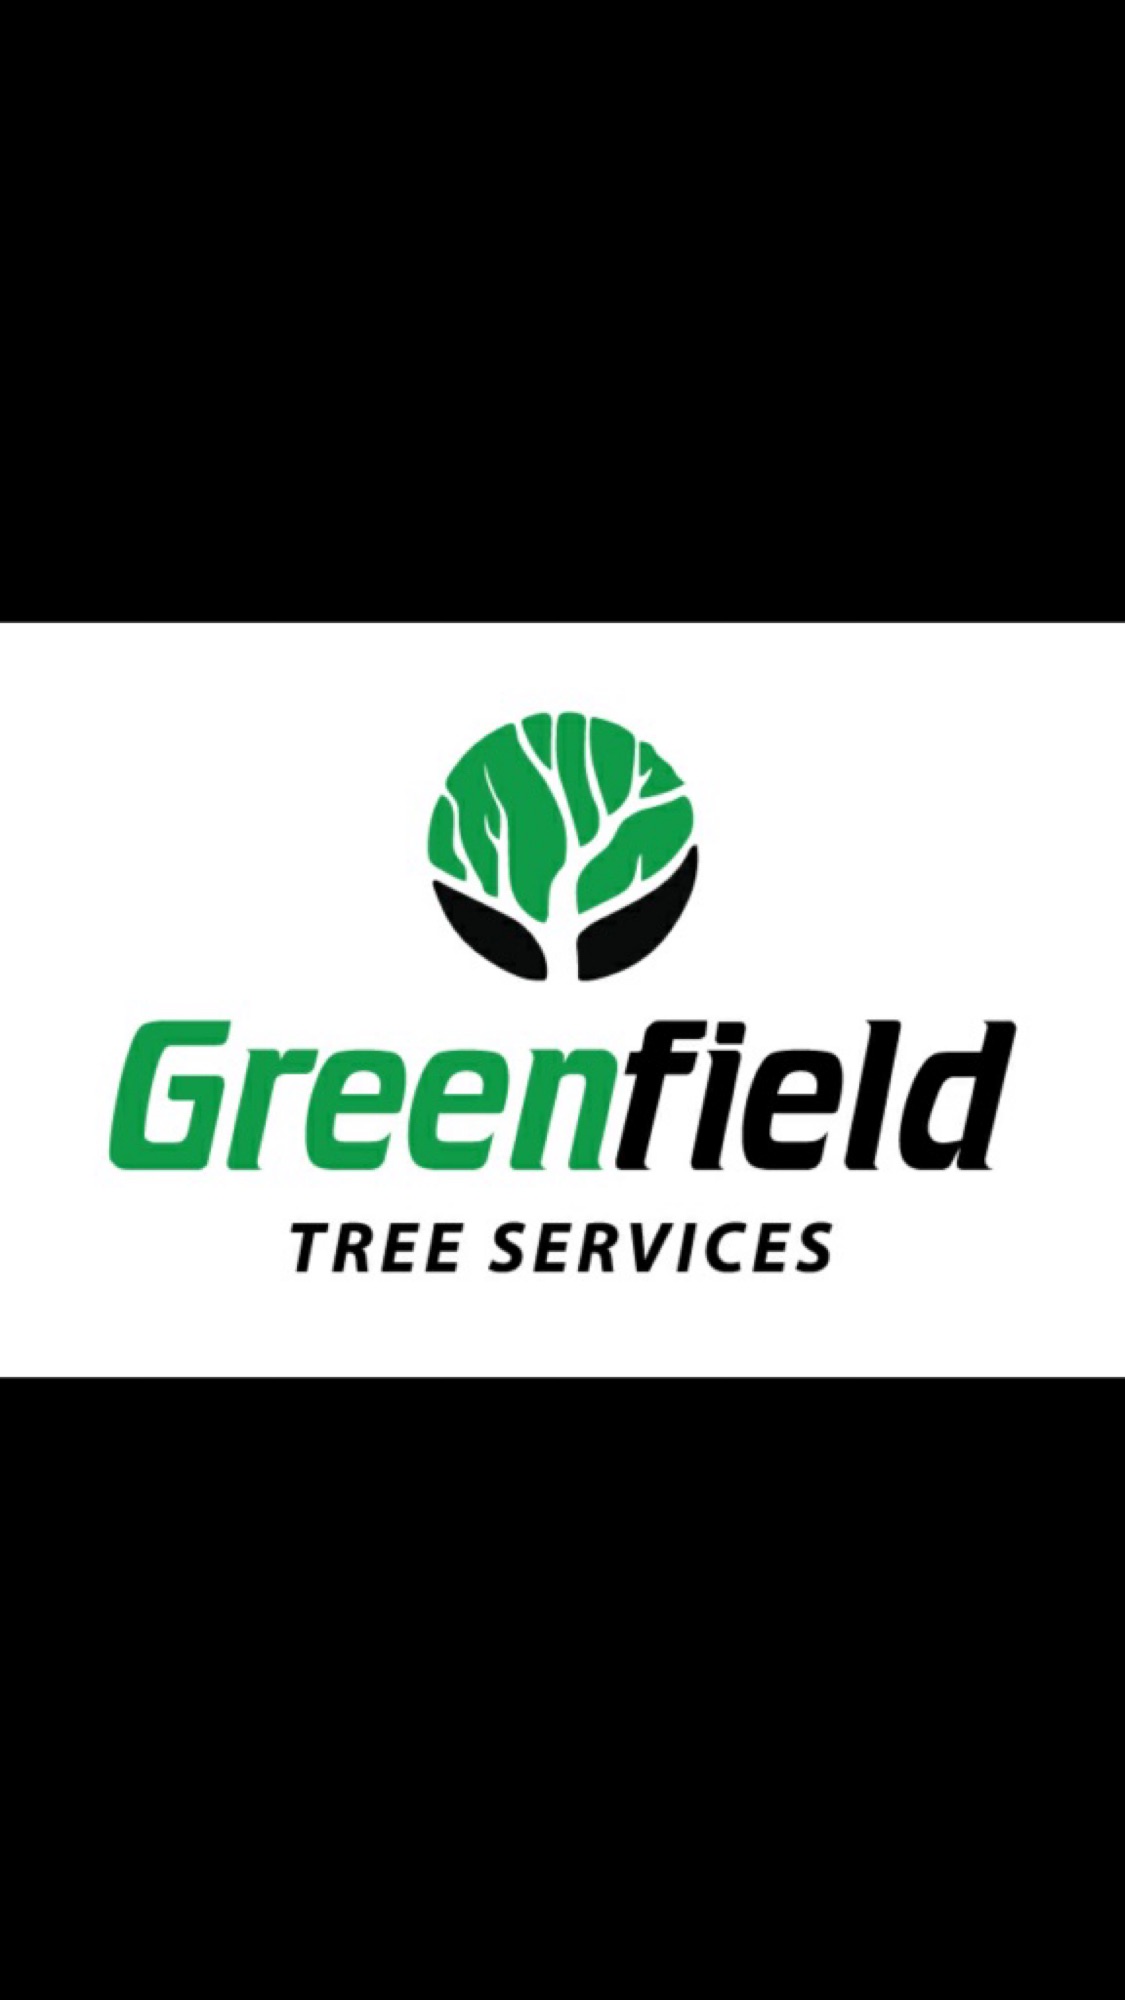 Greenfield Tree Services Logo